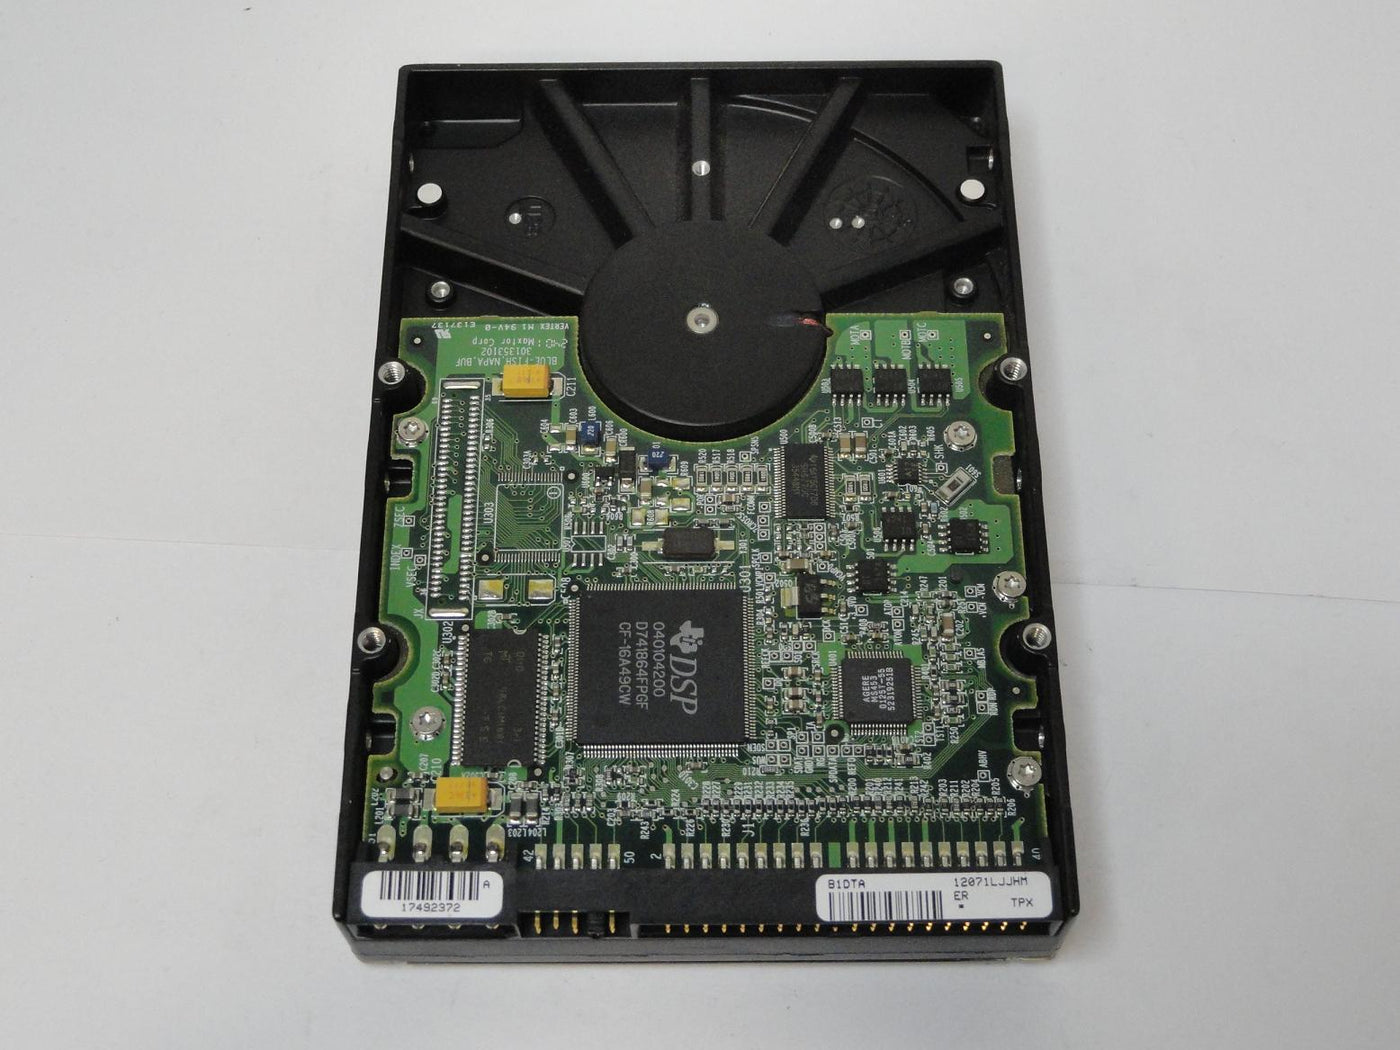 MC1736_5T010H1_HP Maxtor IDE 10Gb 7200rpm 3.5in HDD - Image2